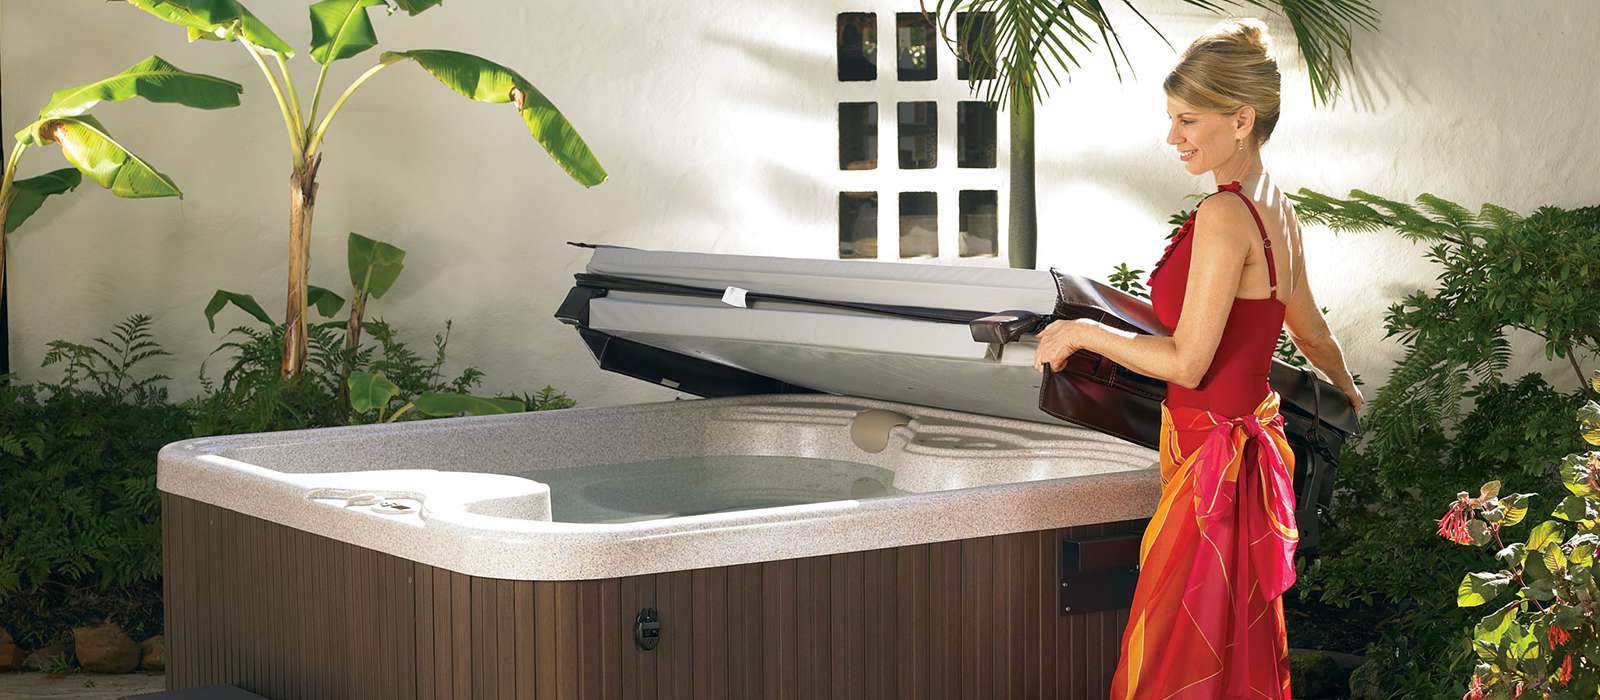 The SX 3 person hot tub provides the same unique features found in much larger spas, with a slim profile perfect for smaller spaces. 